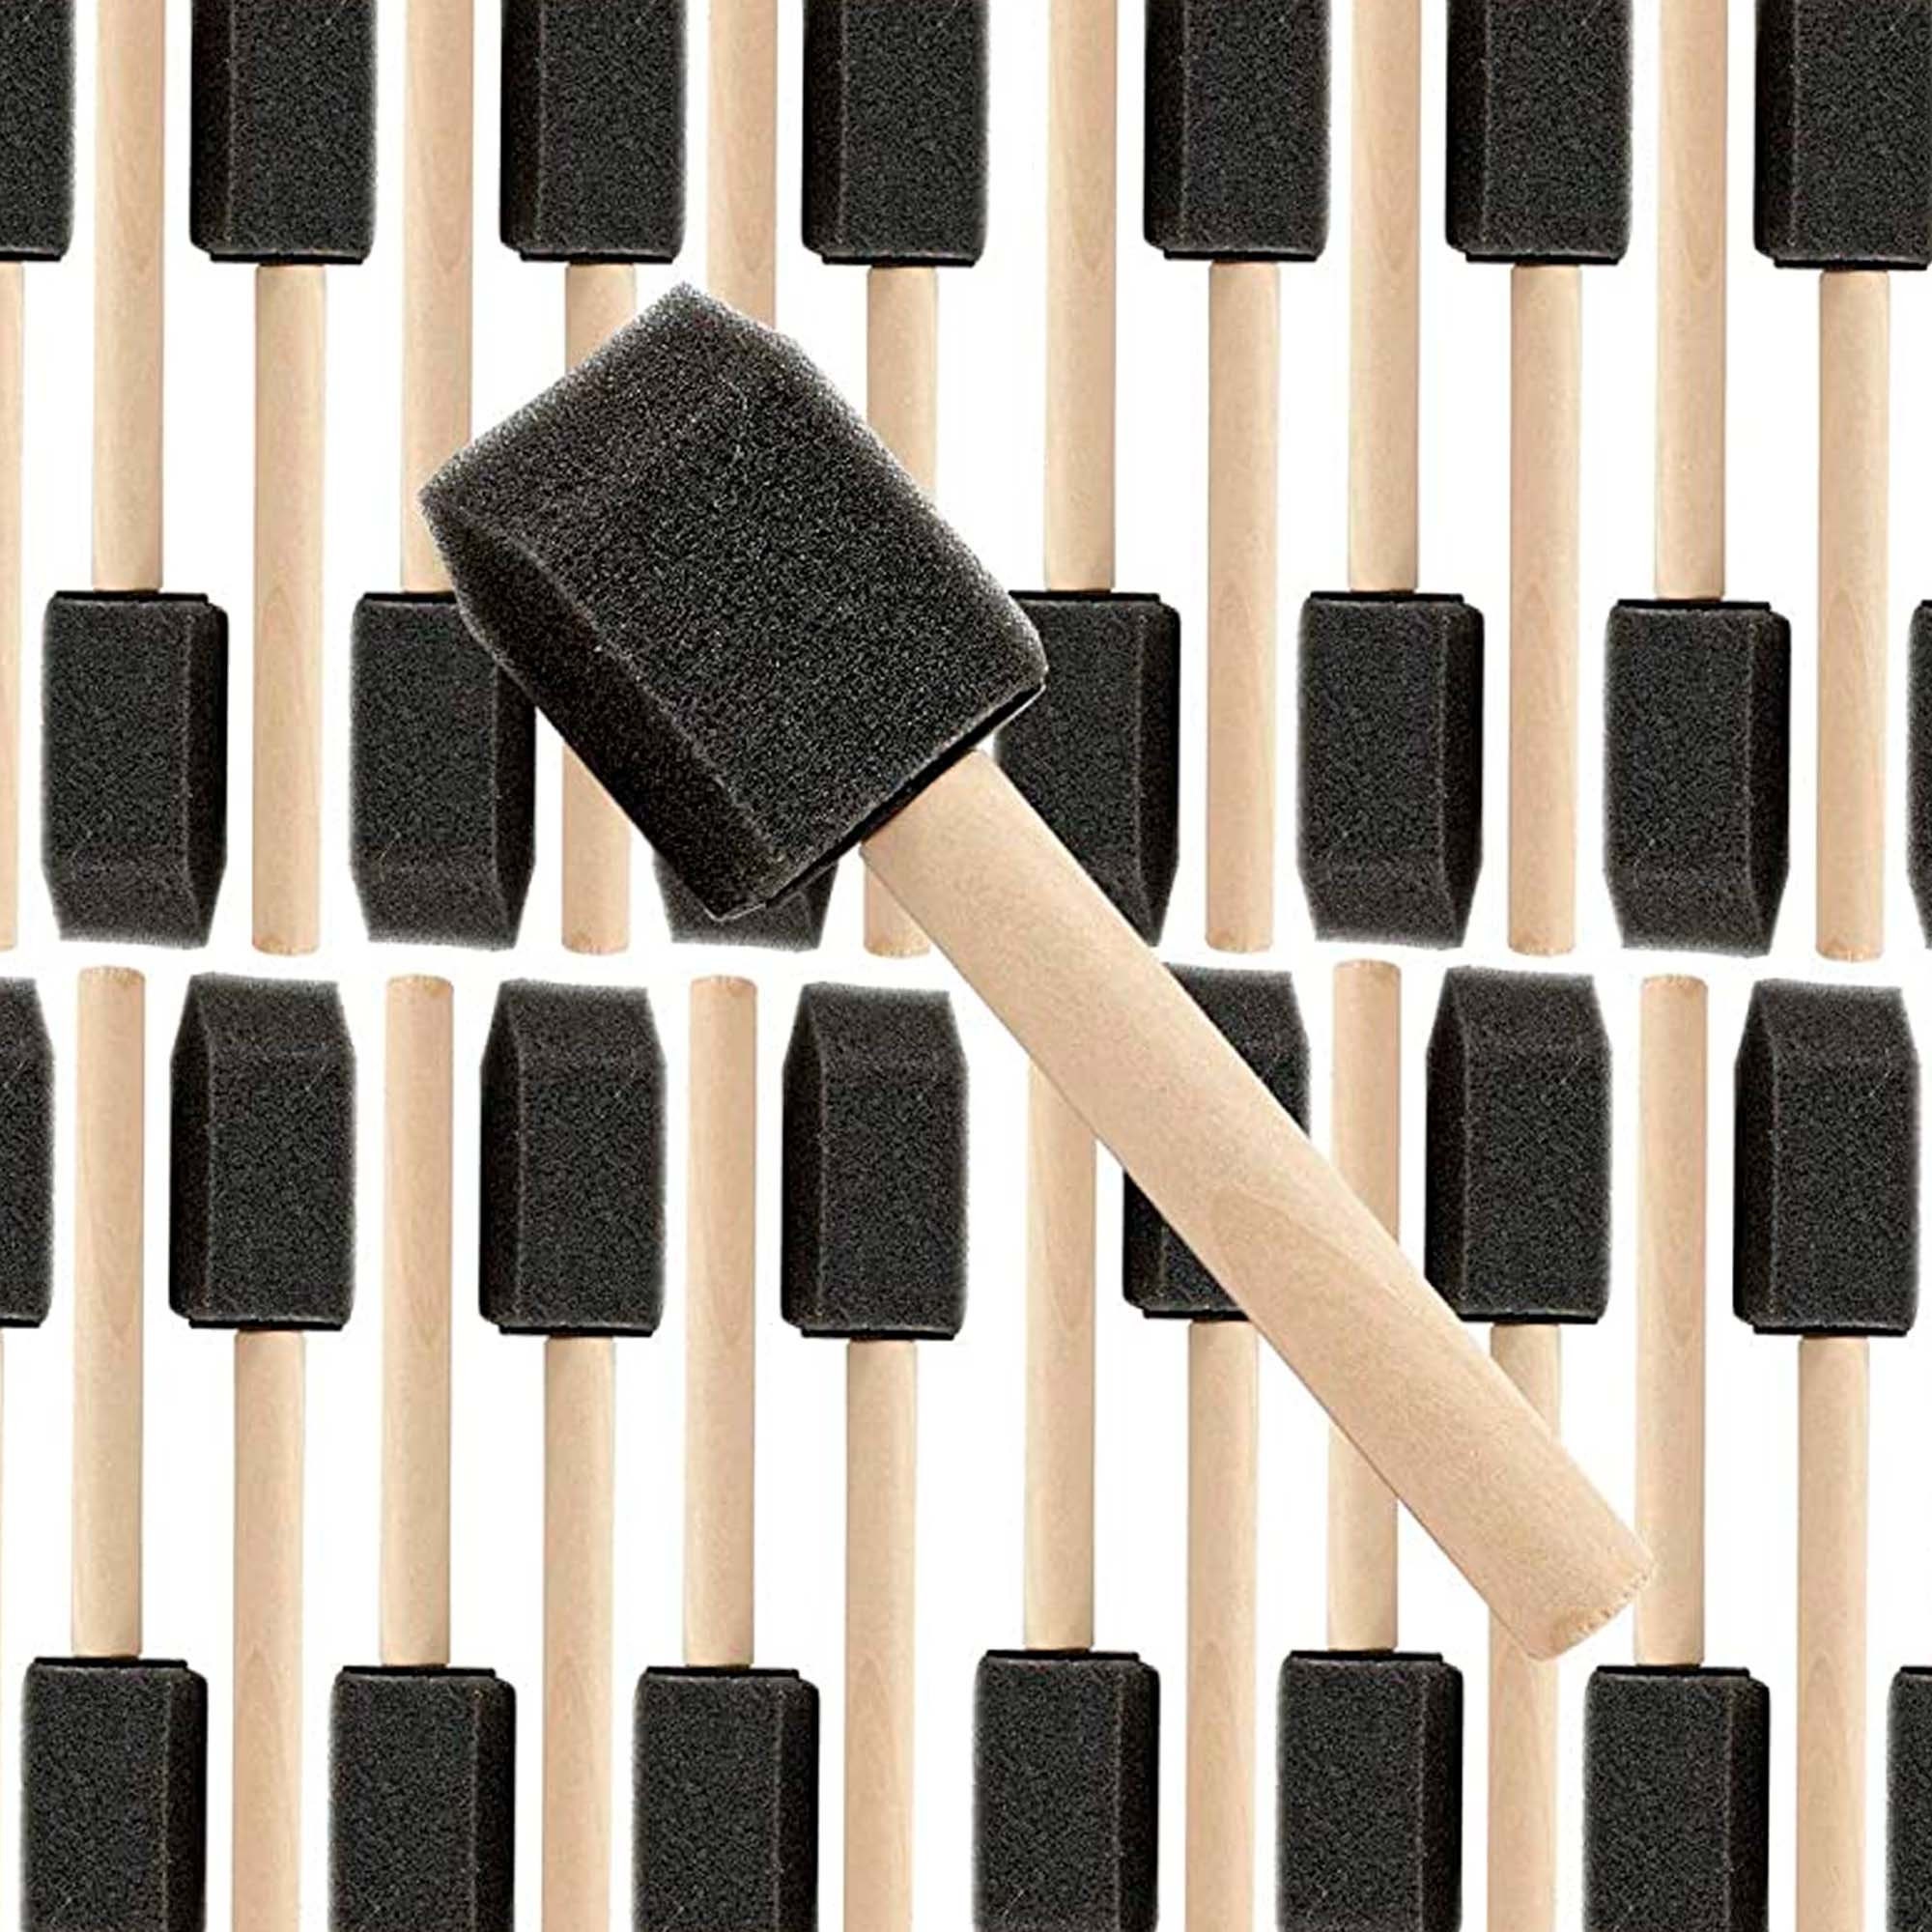 DARICE Black Foam Paint Brushes and Daubers 60 Pieces With Wood